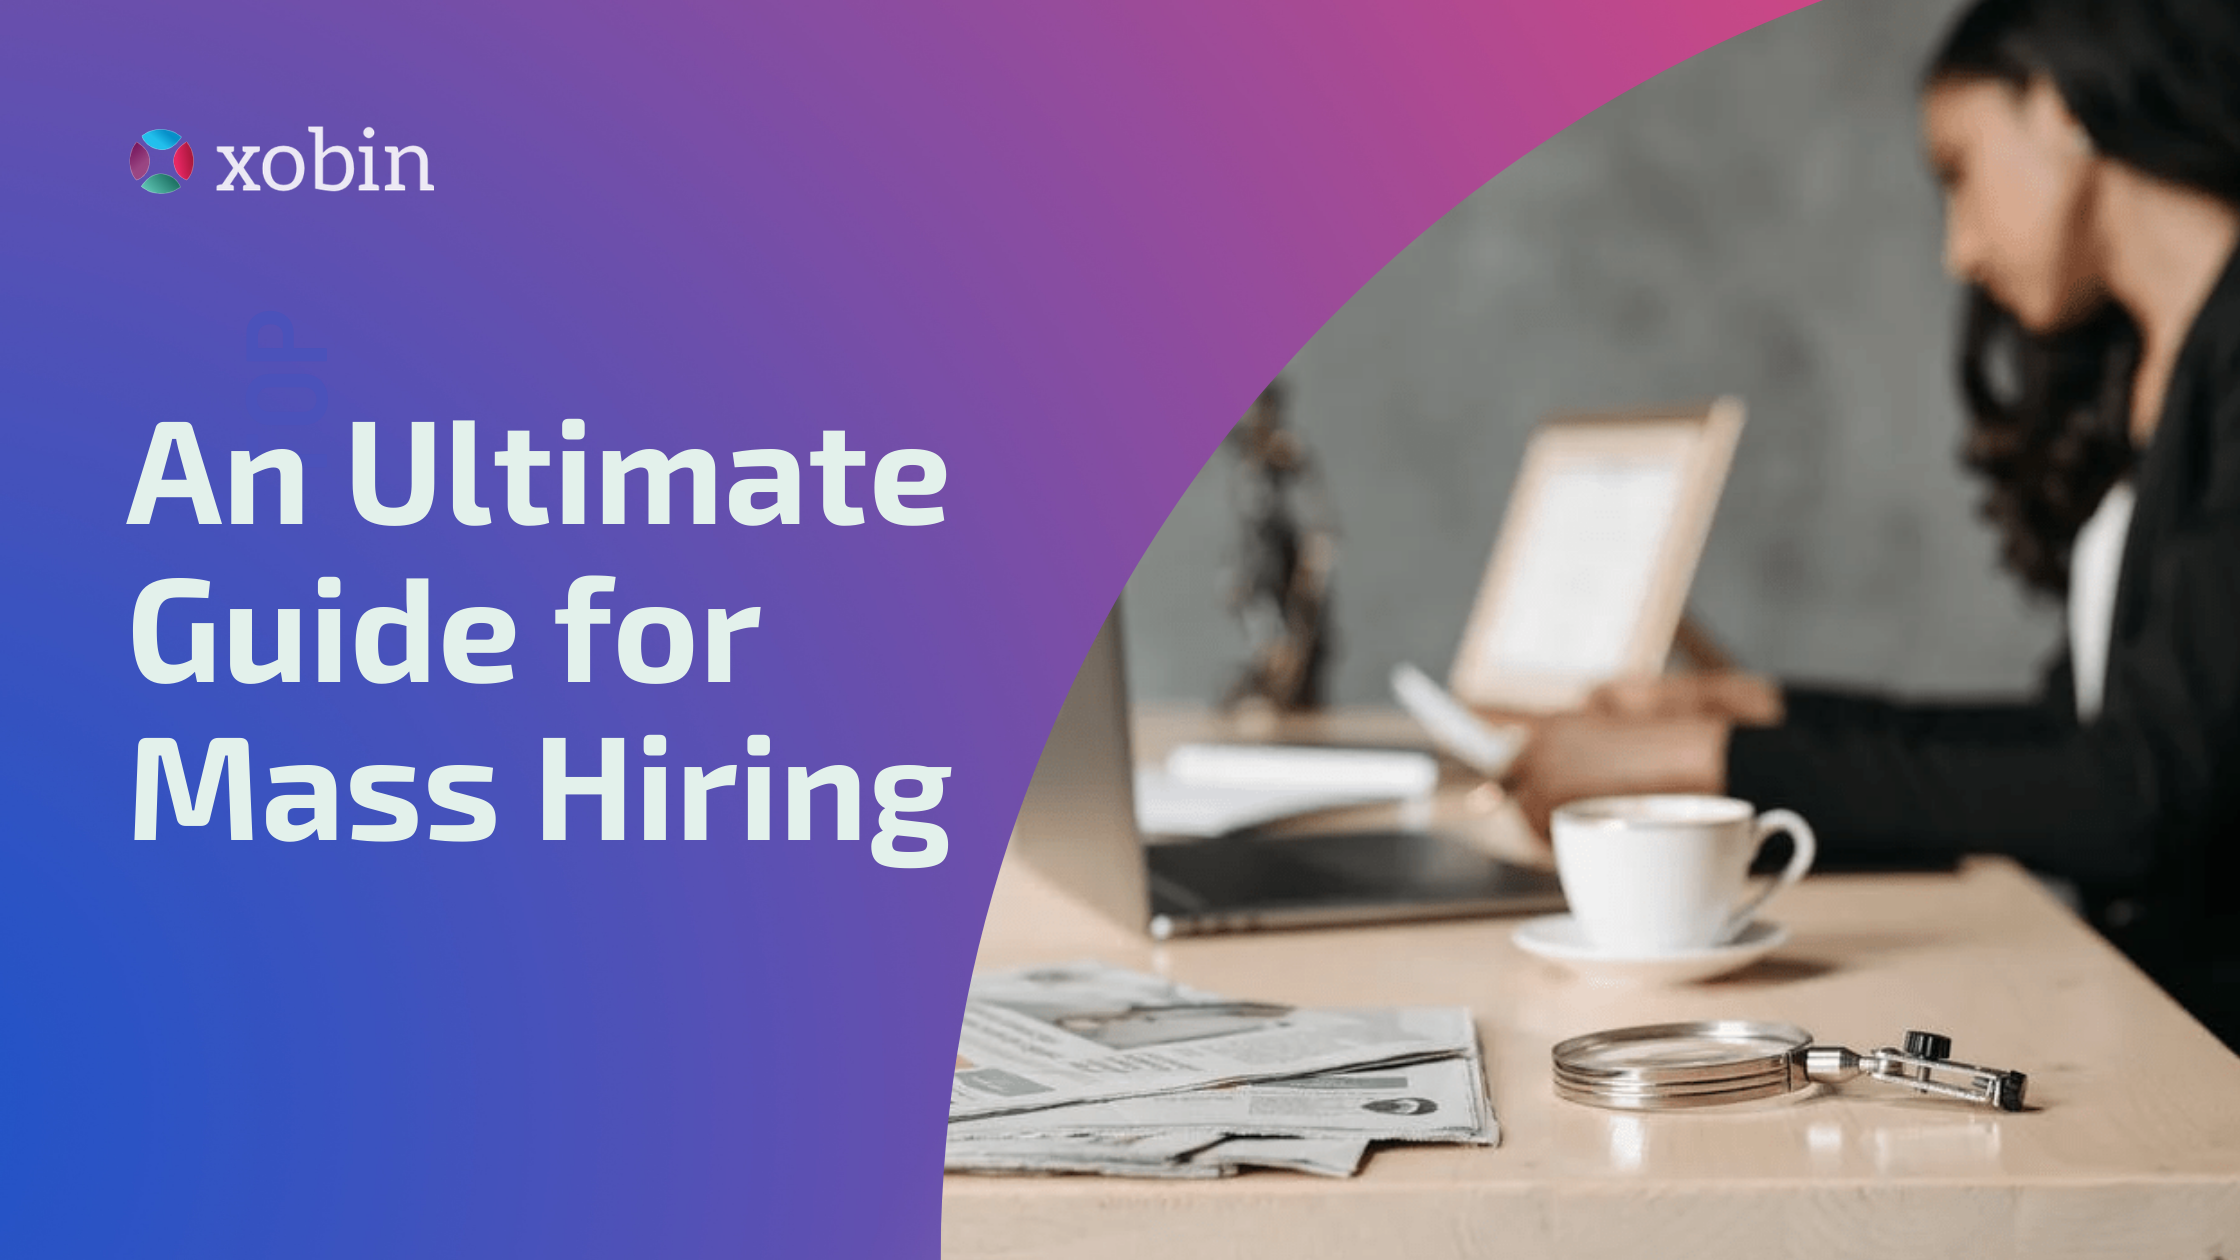 An Ultimate Guide for Mass Hiring